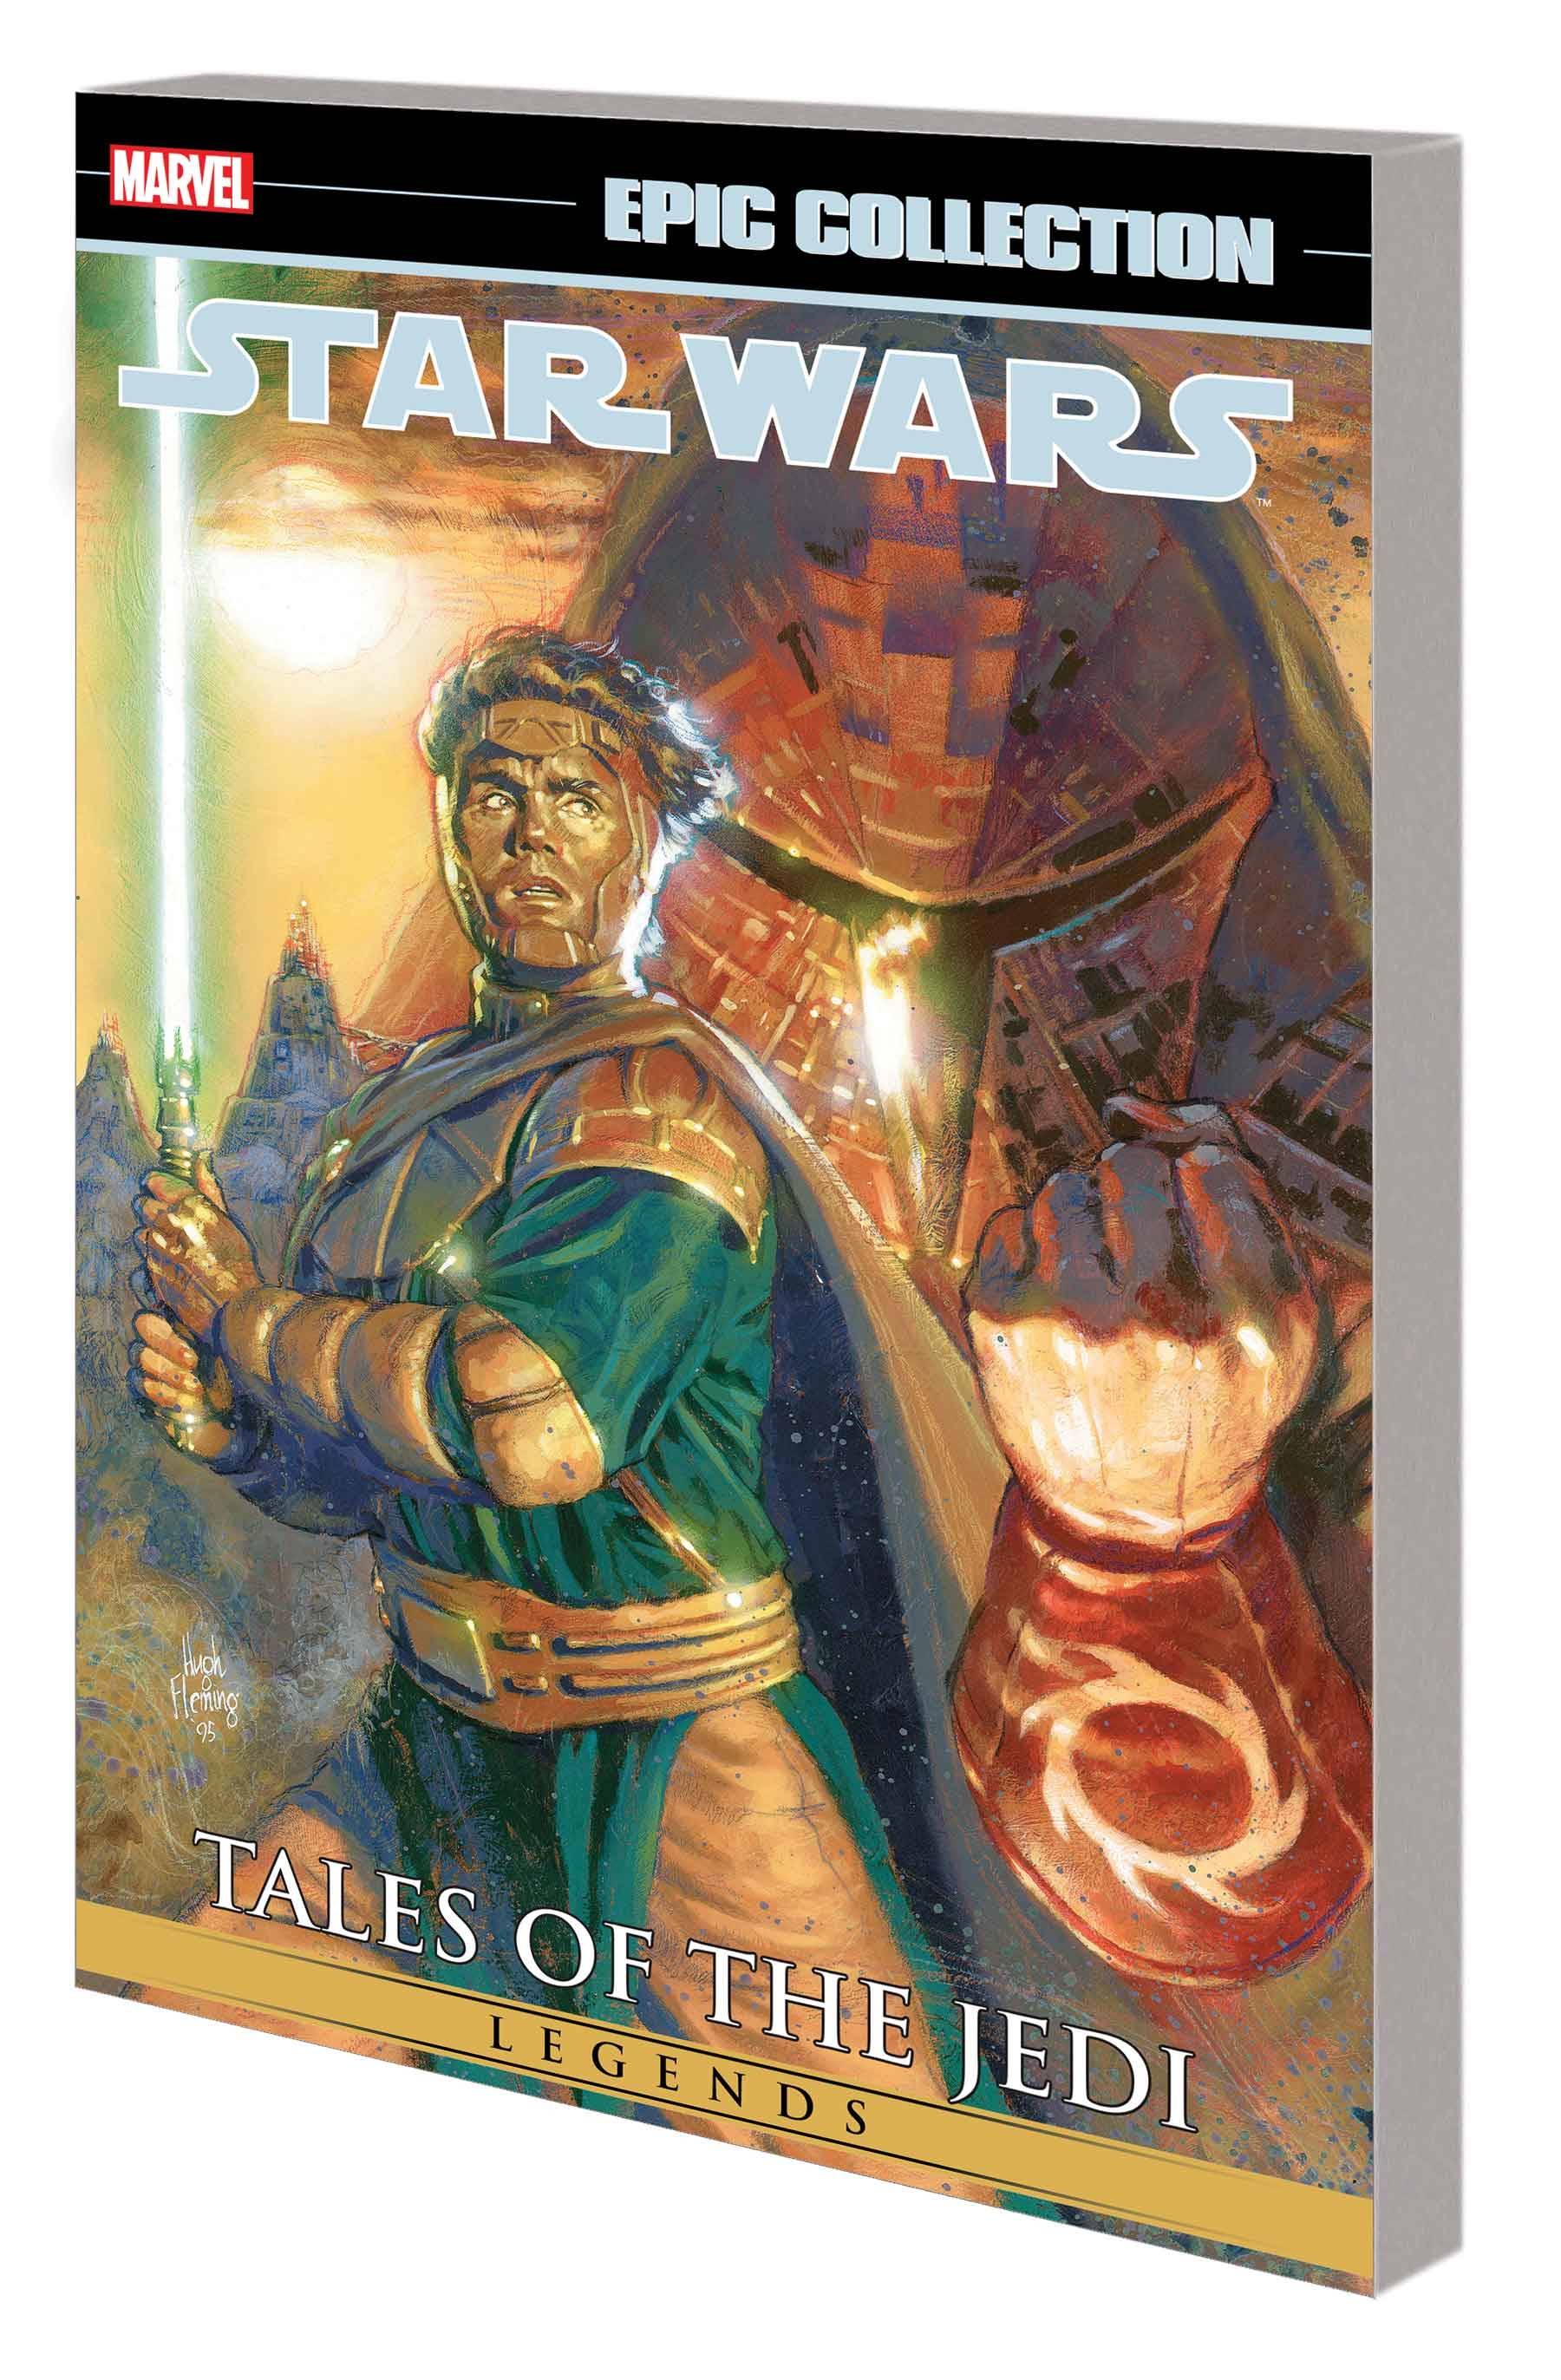 Star Wars Legends Epic Collection Tp Vol 03 Tales Of Jedi - State of Comics